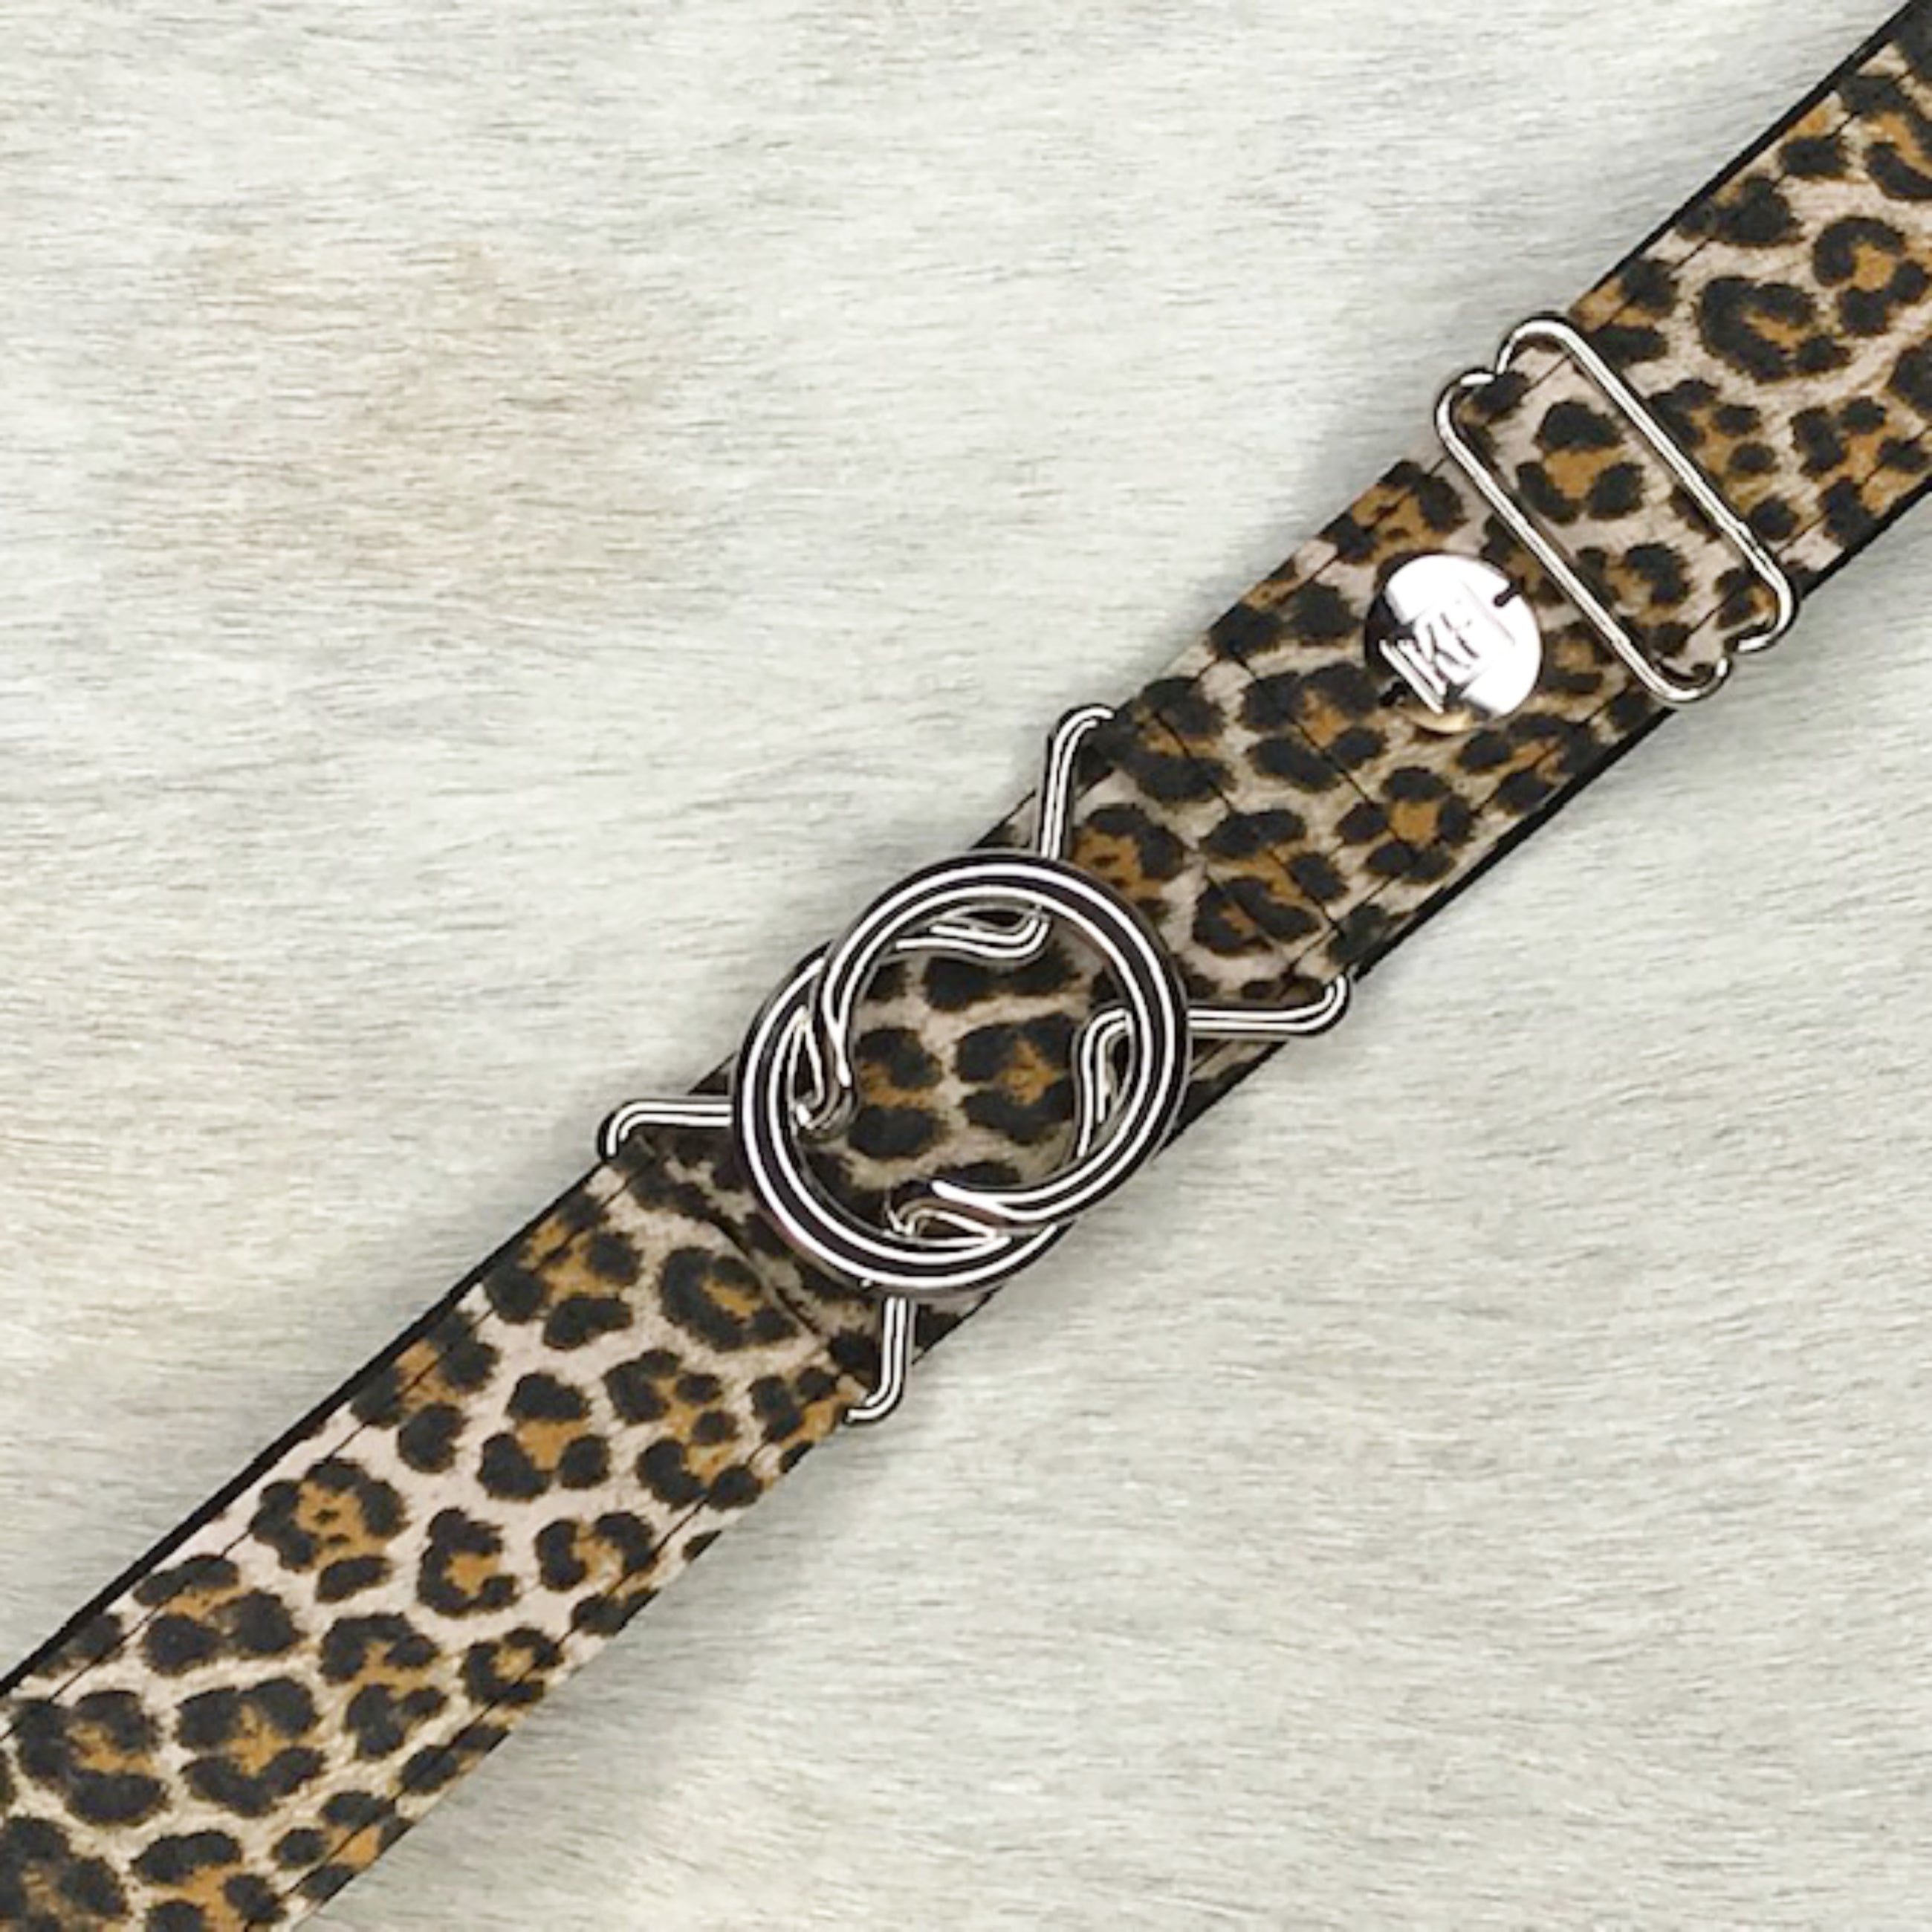 Cheetah belt with 1.5" silver interlocking buckle by KF Clothing